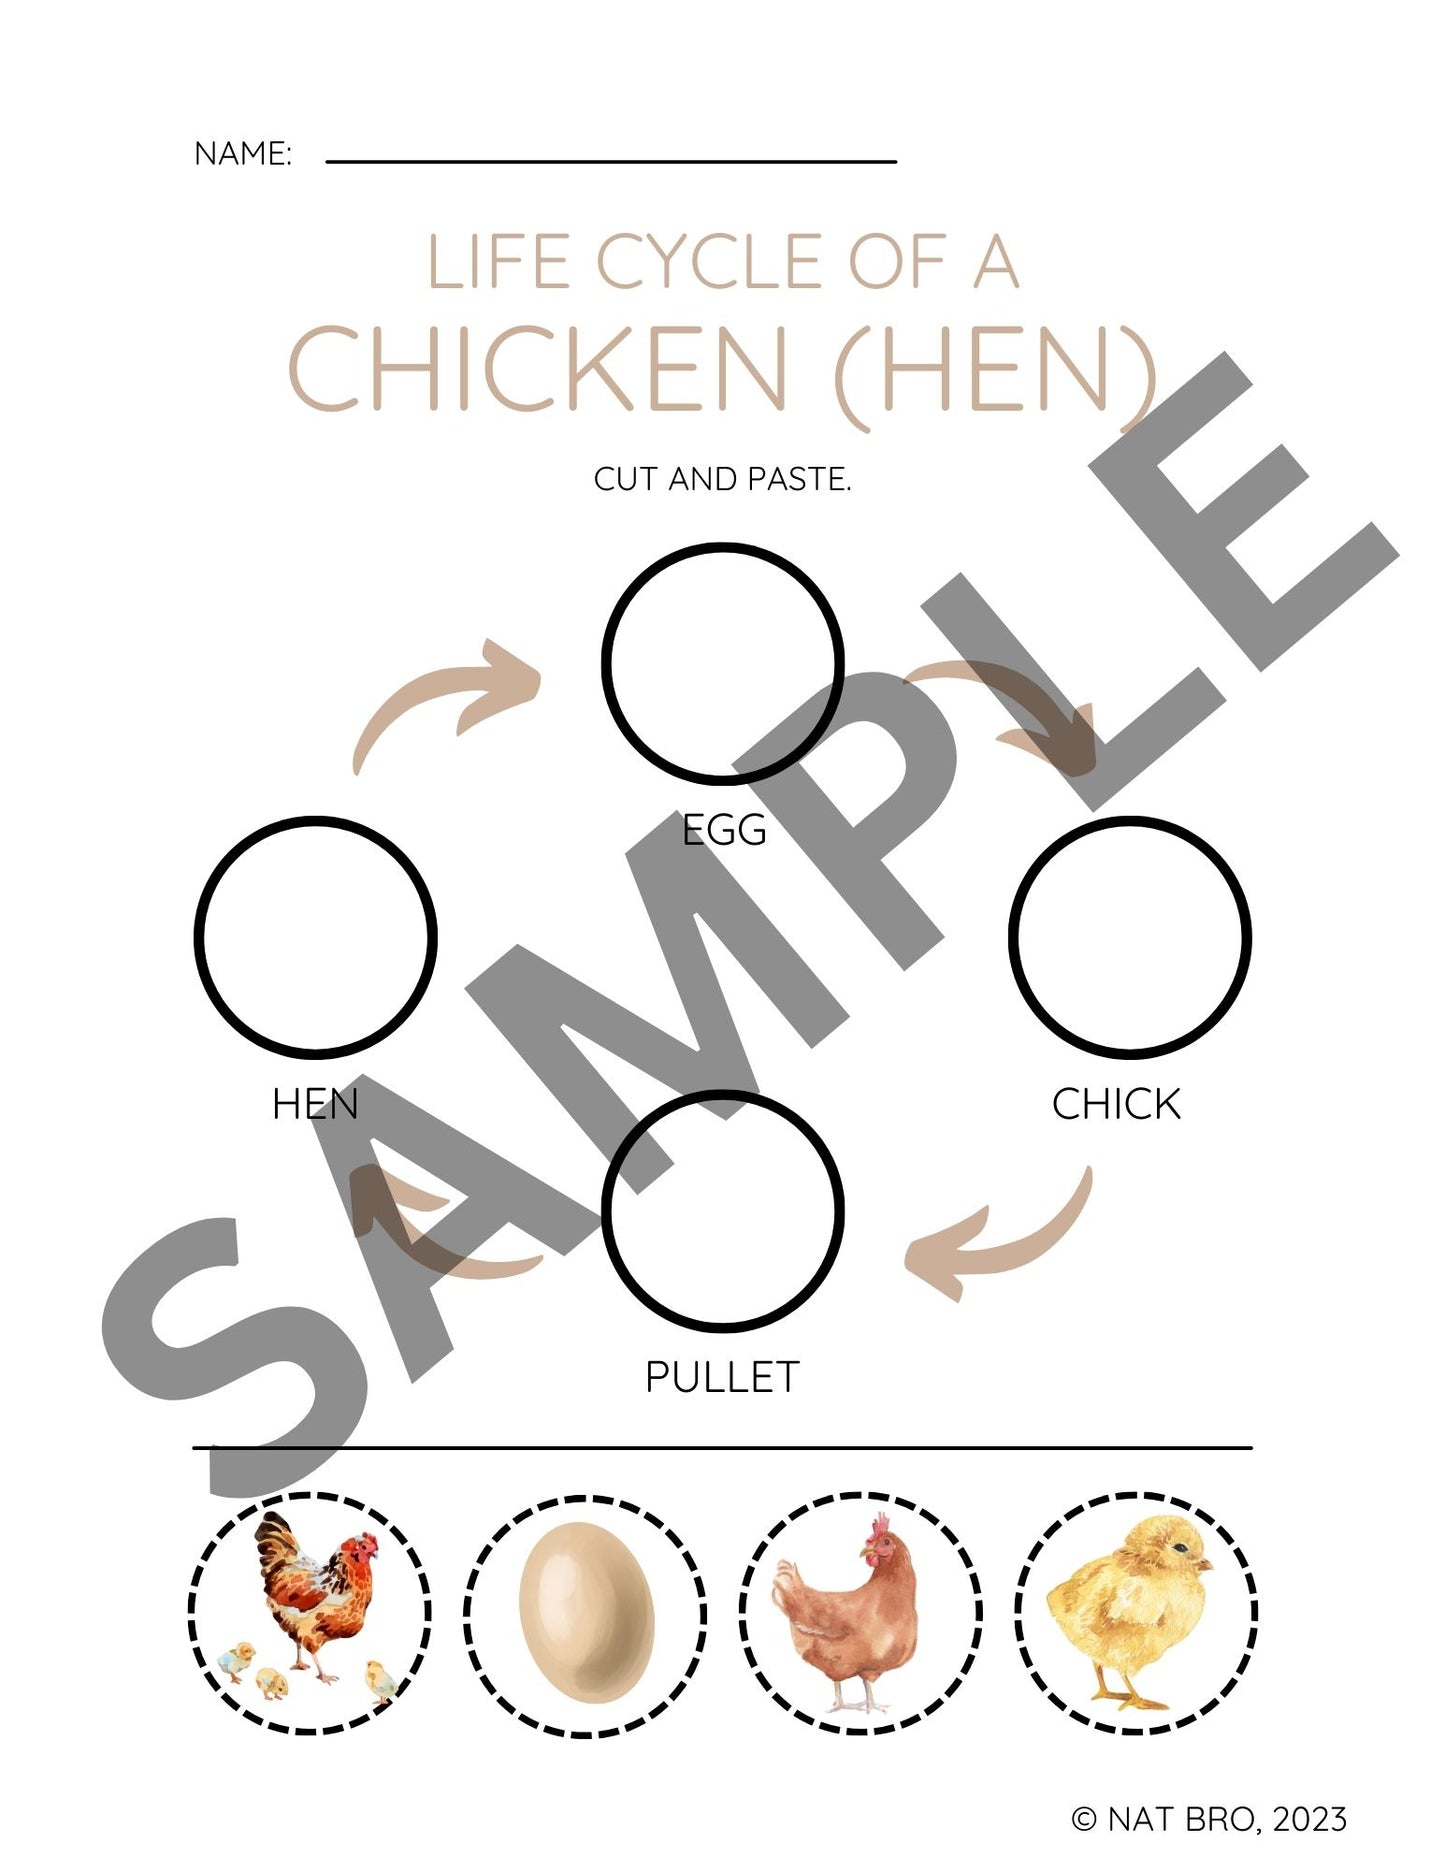 Animal Life Cycle Series: The Chicken